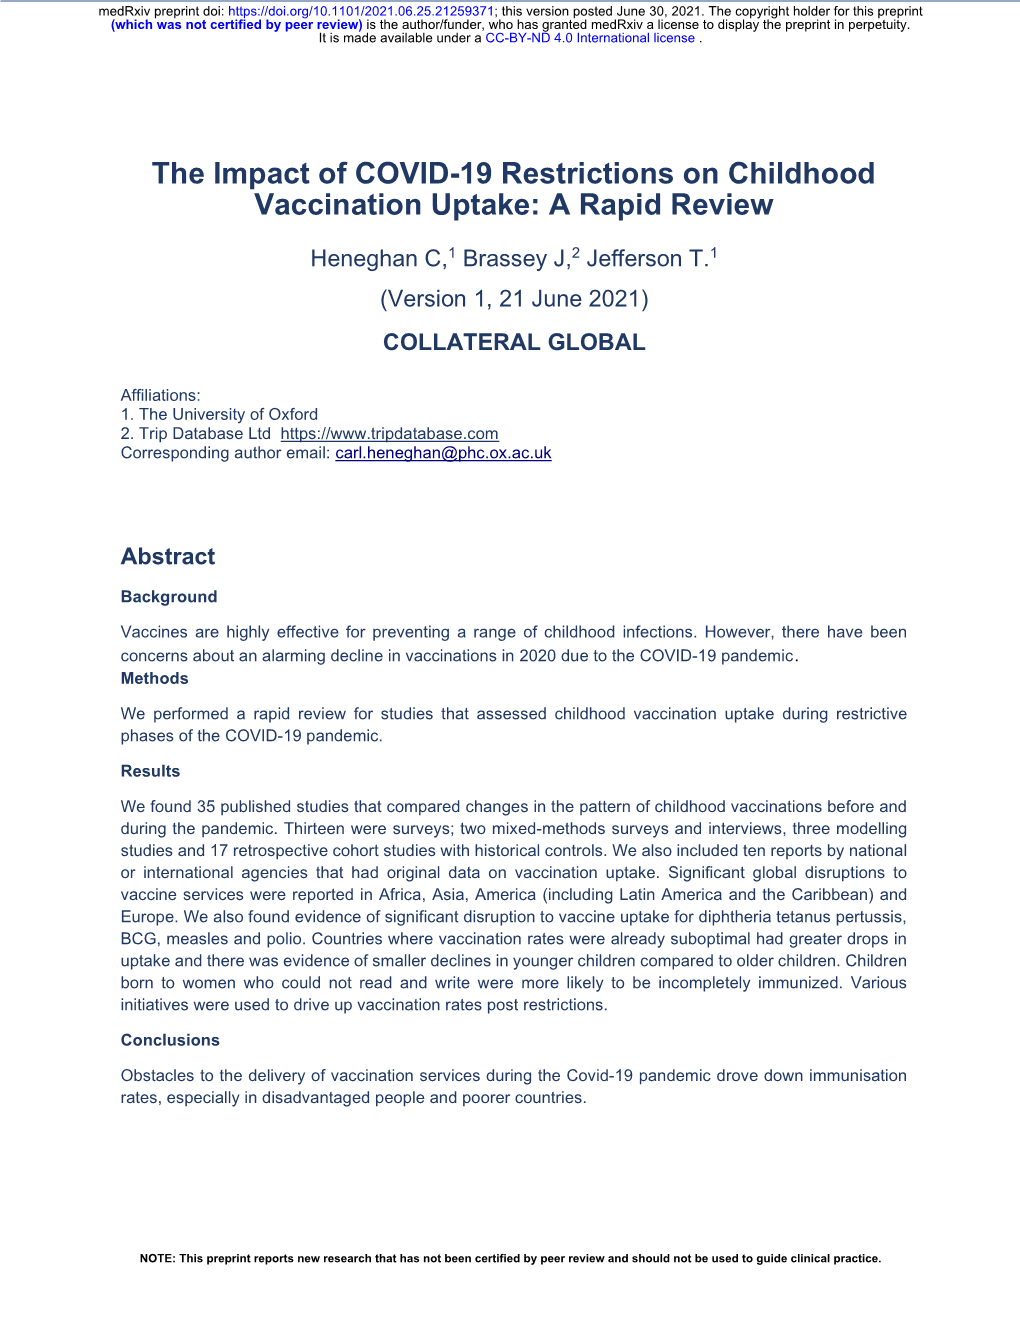 The Impact of COVID-19 Restrictions on Childhood Vaccination Uptake: a Rapid Review